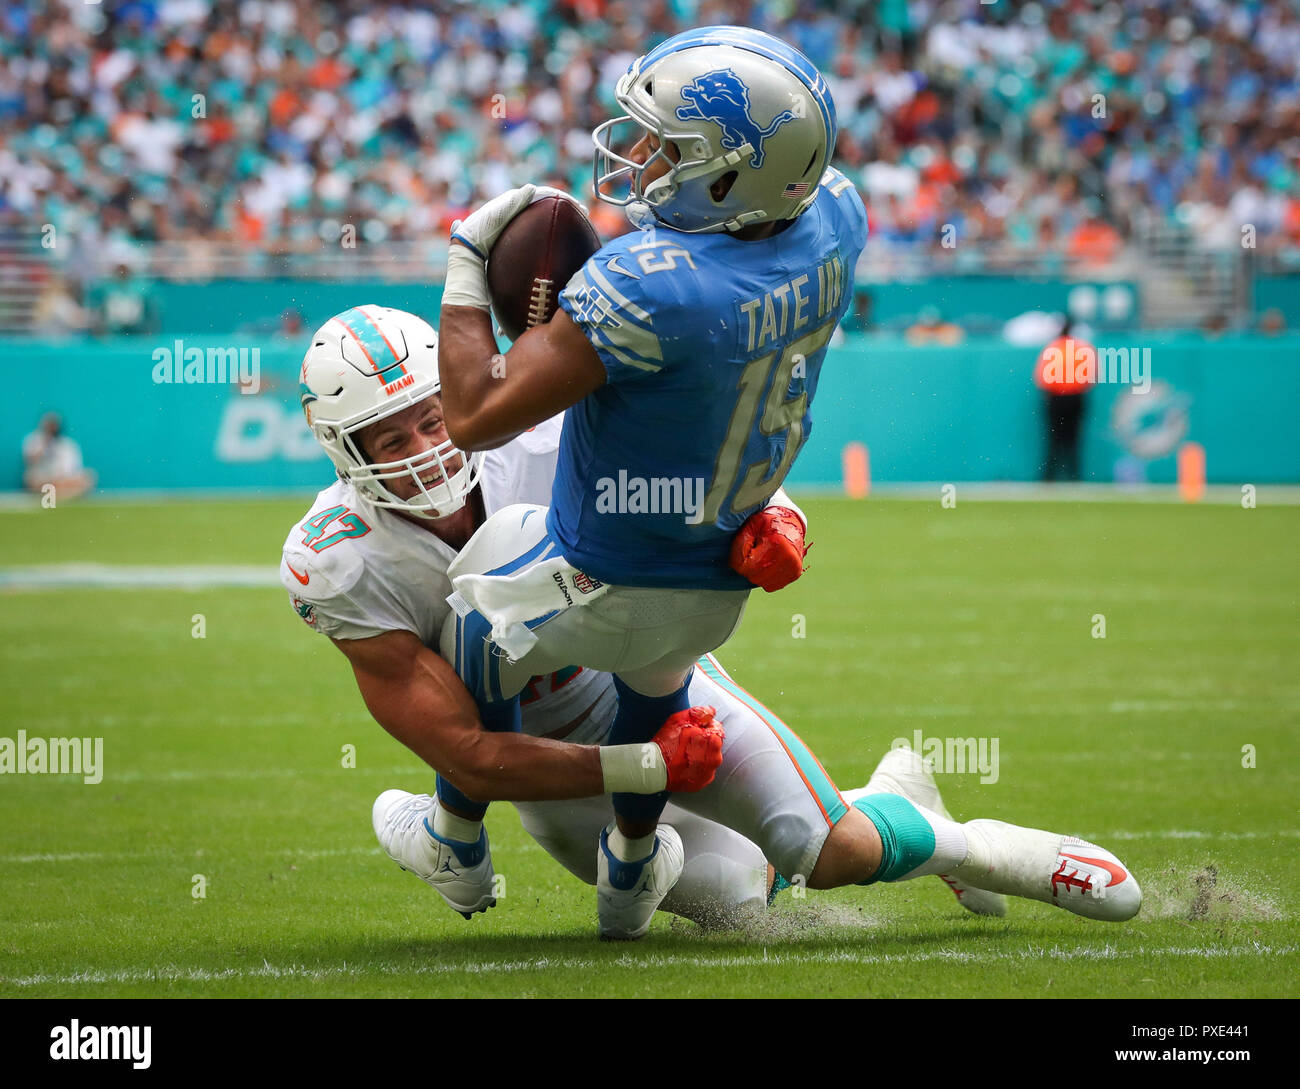 Miami Gardens, Florida, USA. 21st Oct, 2018. Detroit Lions defensive back Tracy Walker (47) holds on to a long pass as he is tackled by Miami Dolphins linebacker Kiko Alonso (47) during a NFL football game between the Detroit Lions and the Miami Dolphins at the Hard Rock Stadium in Miami Gardens, Florida. Credit: Mario Houben/ZUMA Wire/Alamy Live News Stock Photo